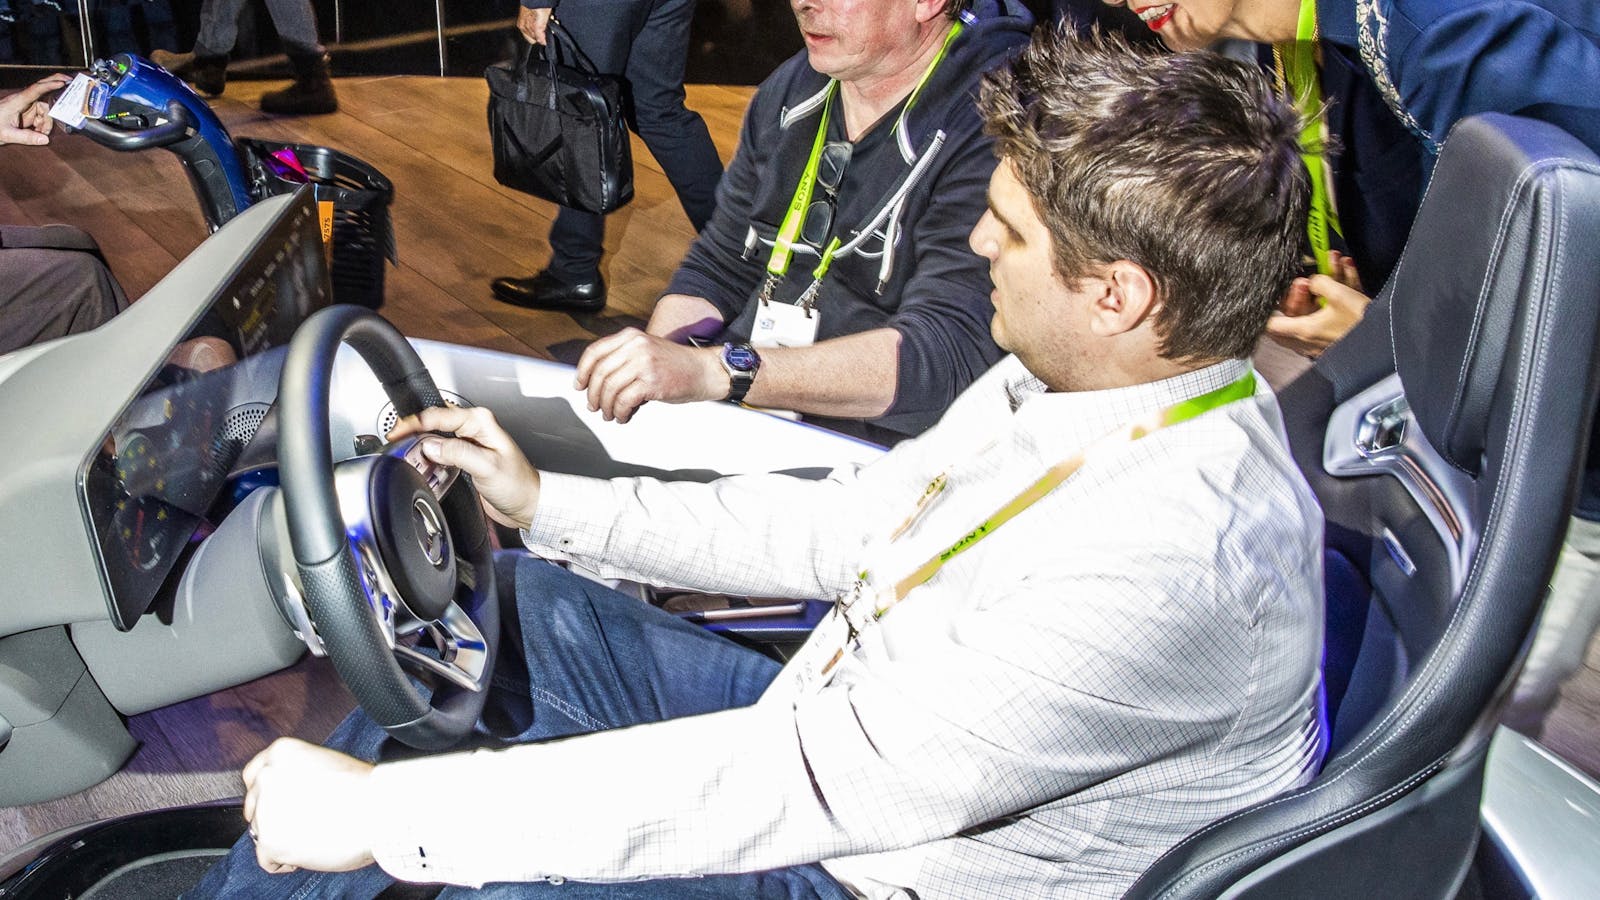 An attendee trying out the Mercedes Benz multimedia system at CES this week. Photo by Bloomberg